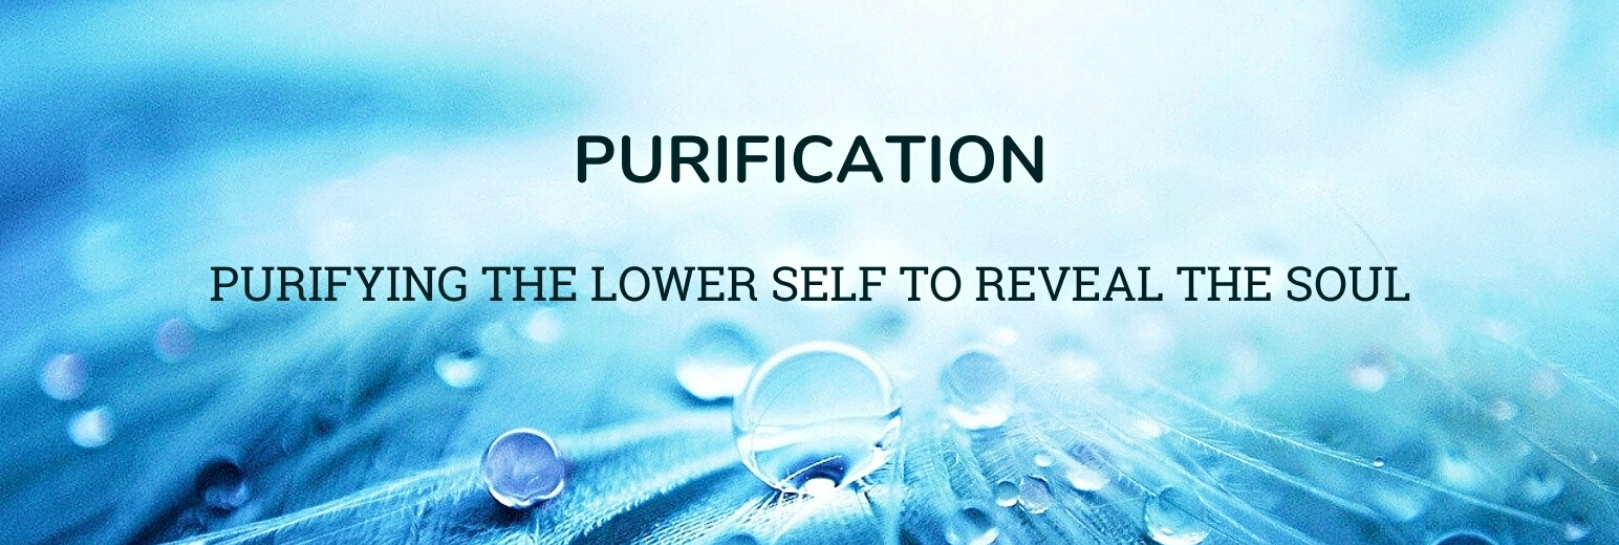 2.  Purification: Purifying the Lower Self to Reveal the Soul